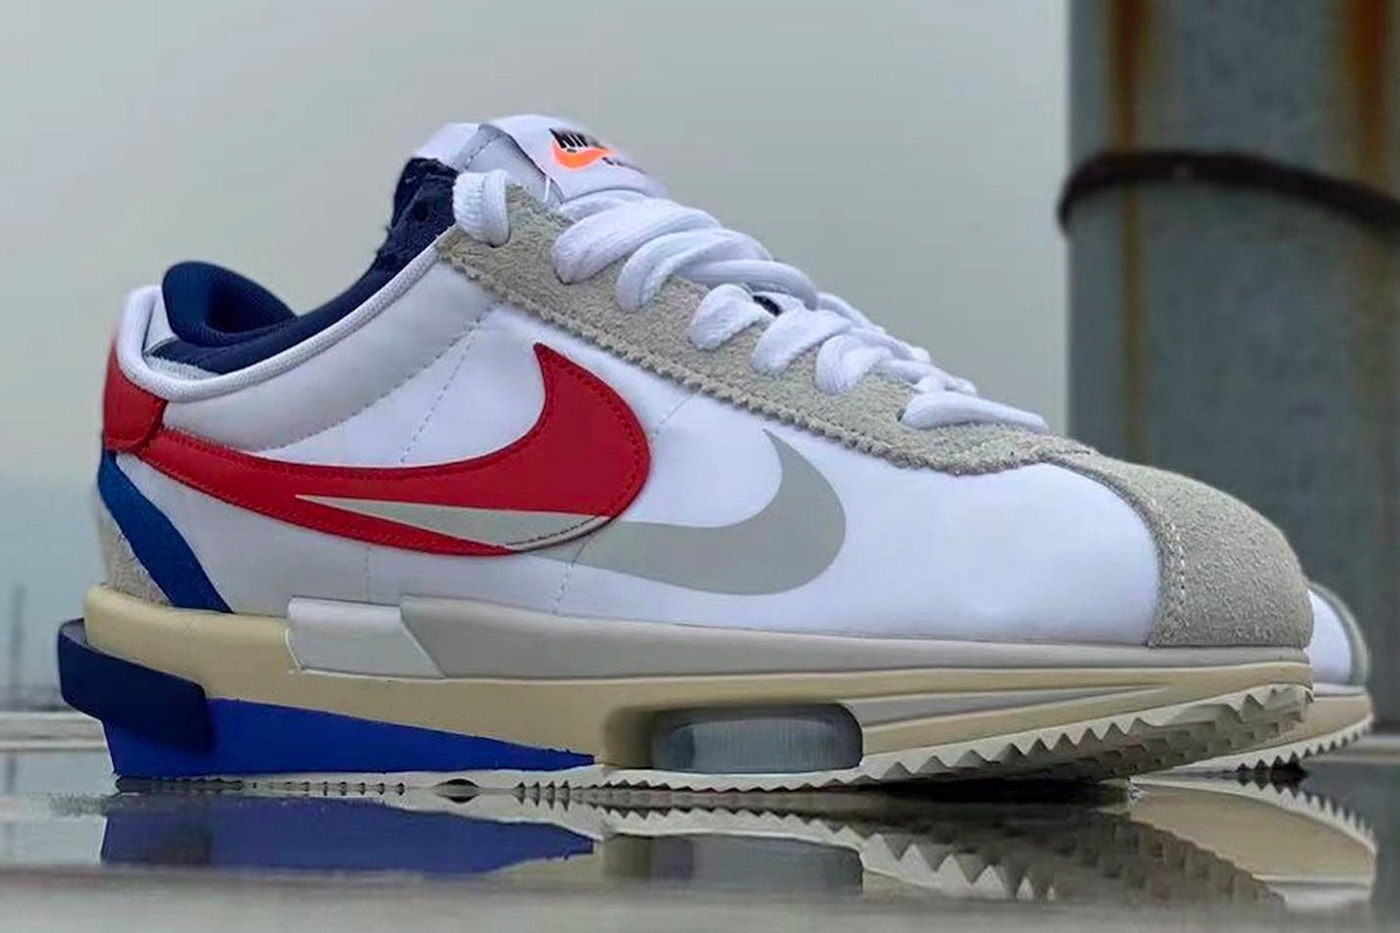 sacai Nike Cortez Collaboration Detailed Look Images release Info